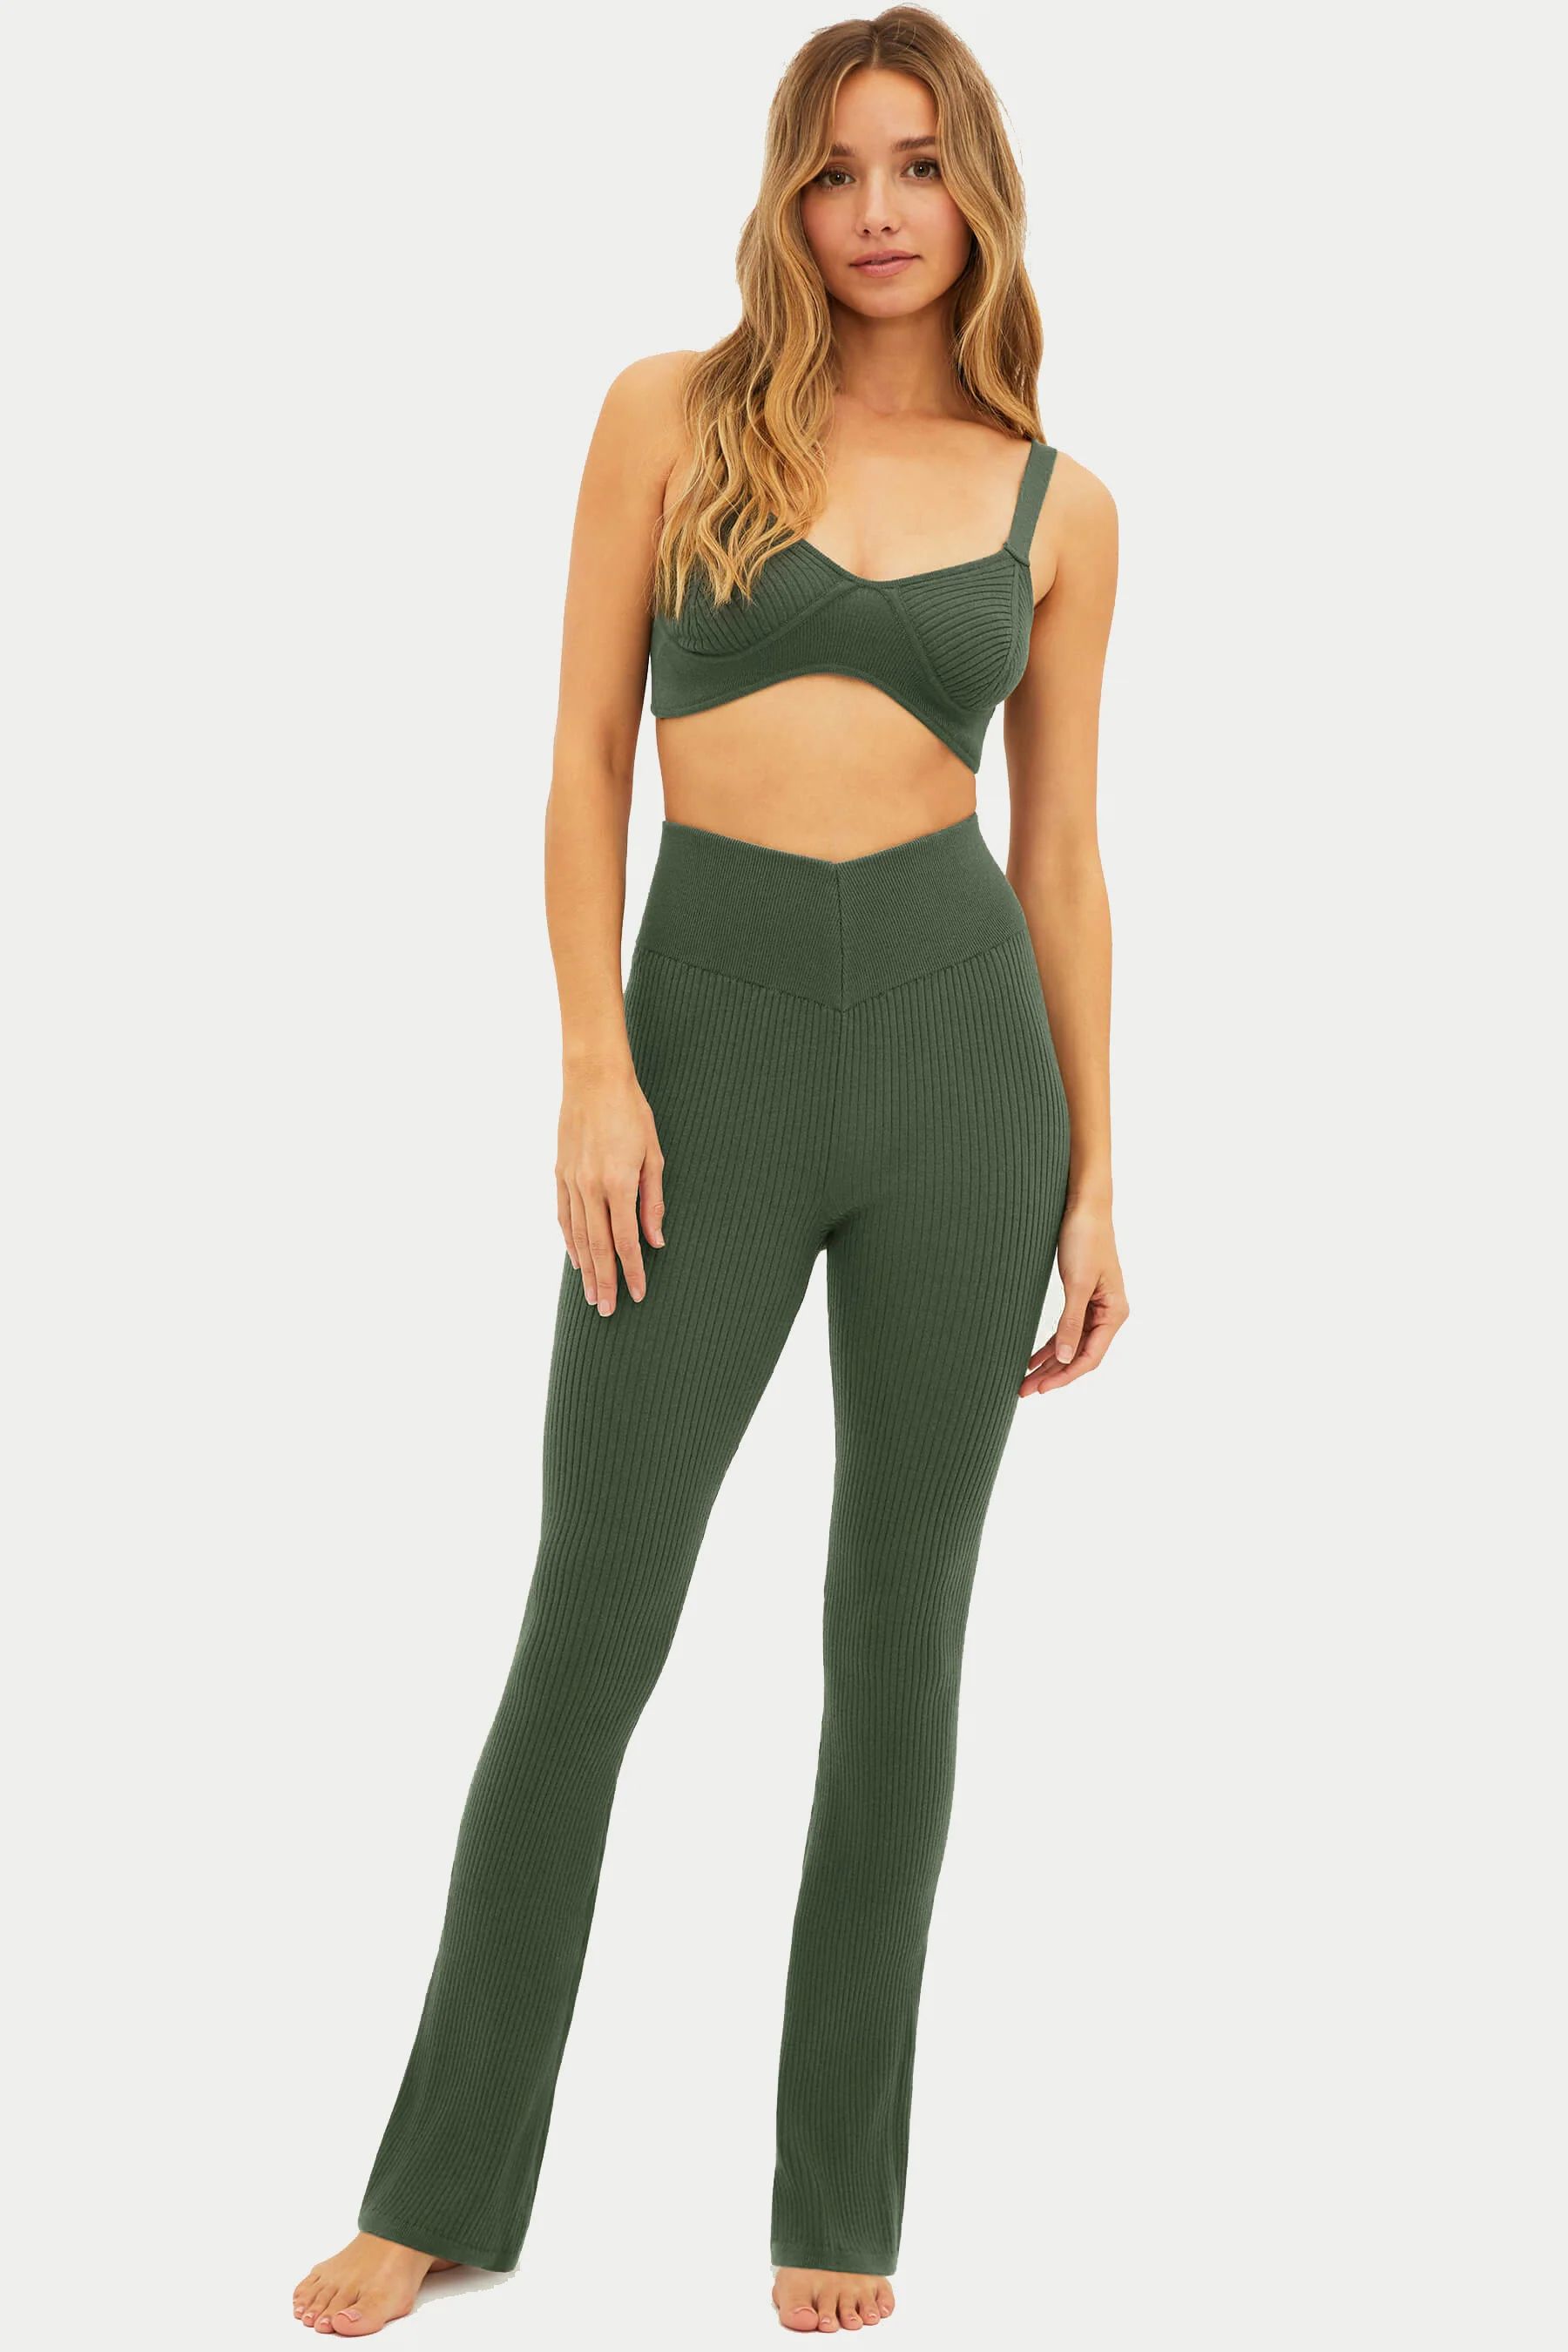 Tory Pant Olive | Beach Riot